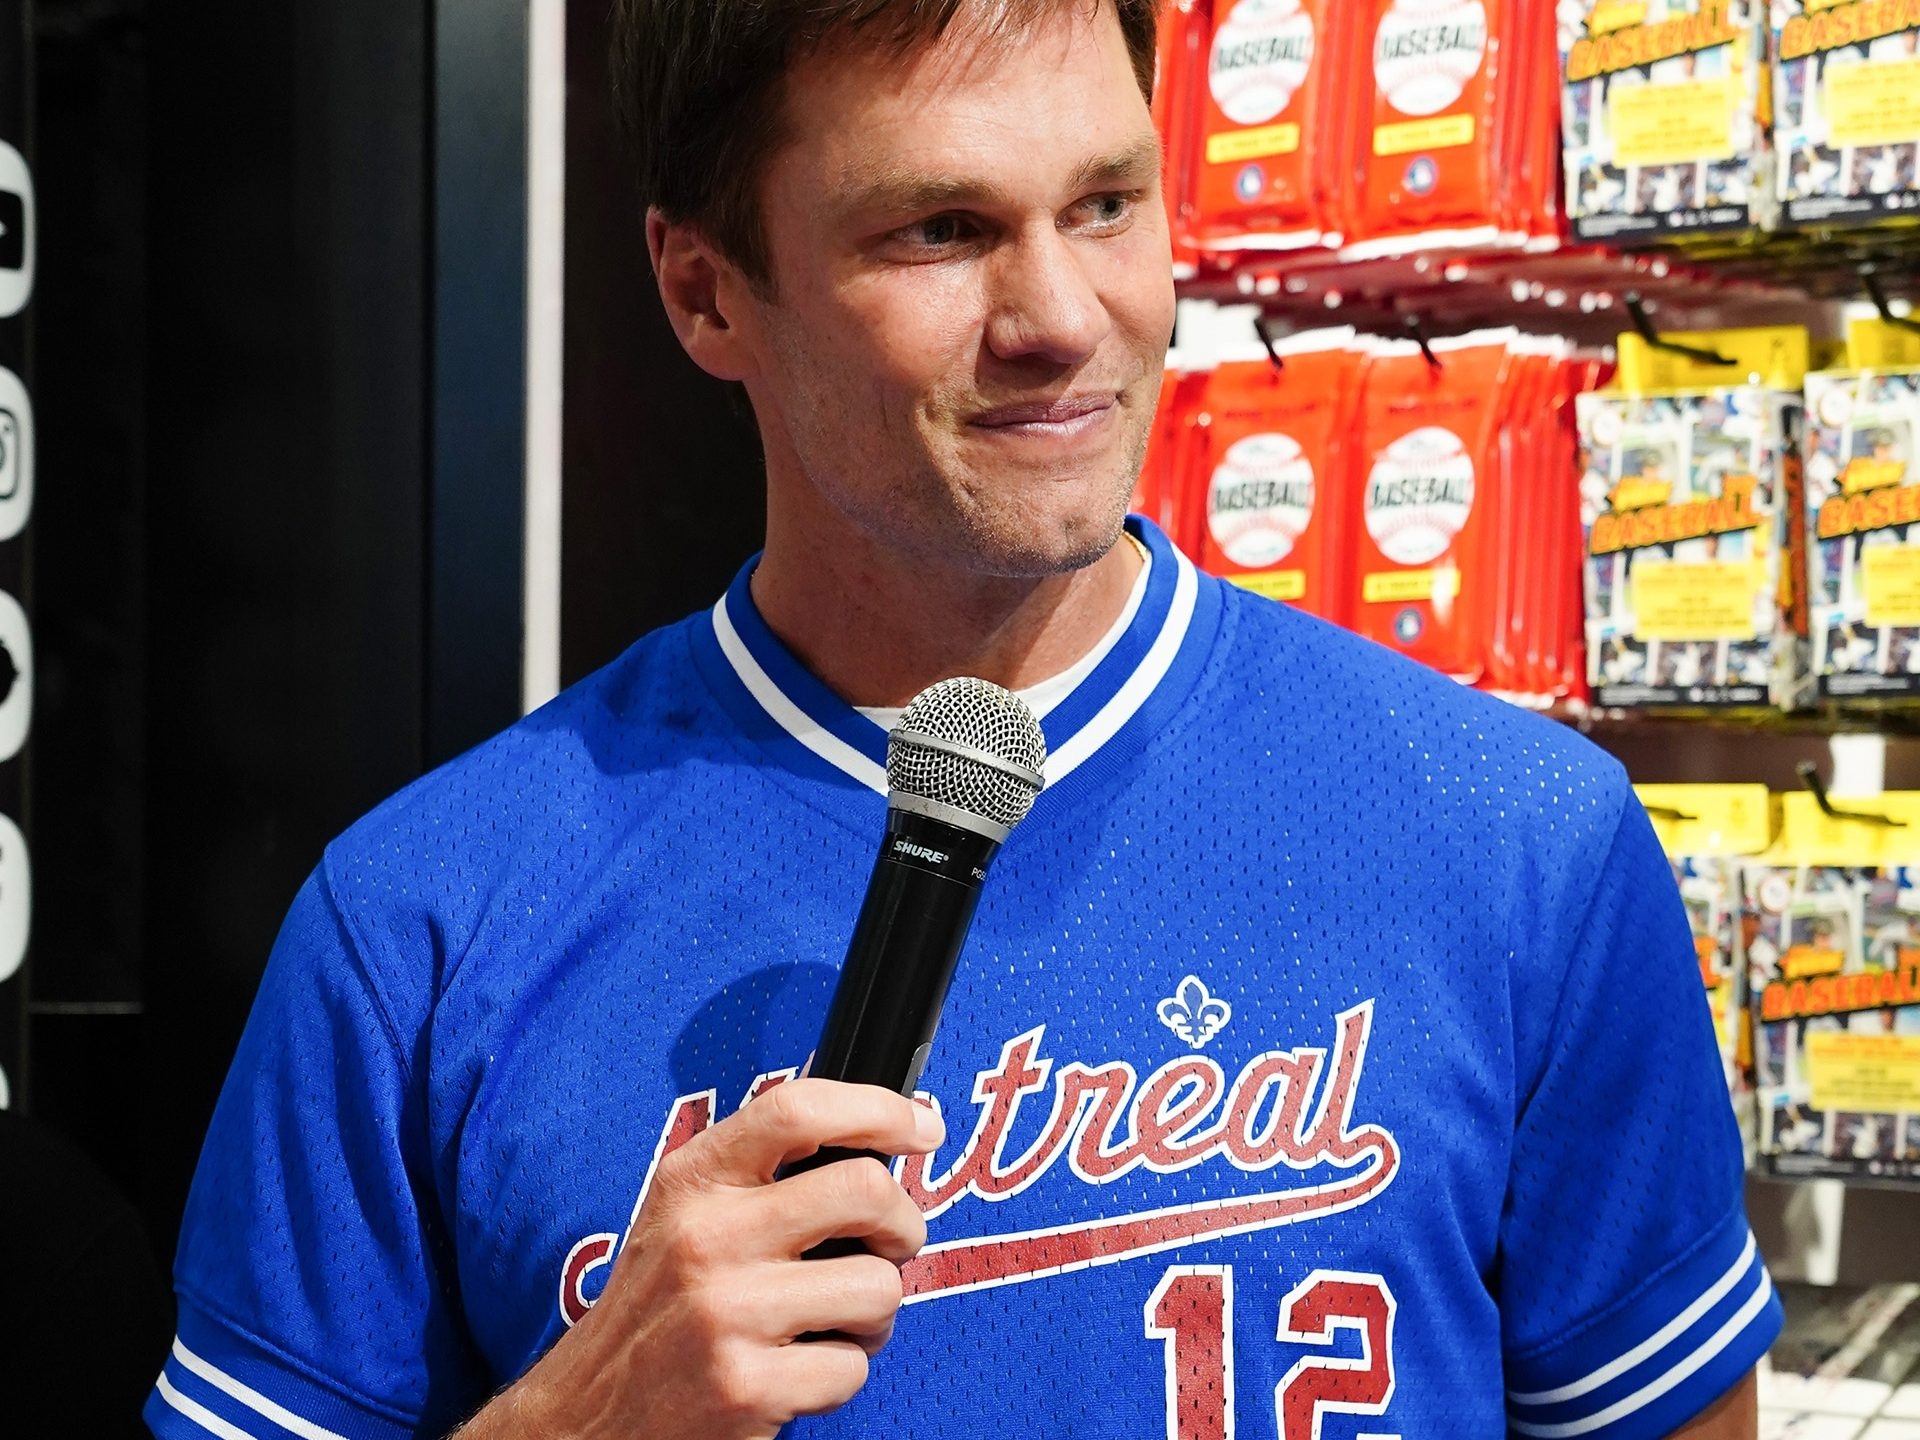 Tom Brady jokes that he's bringing the Expos back to Montreal